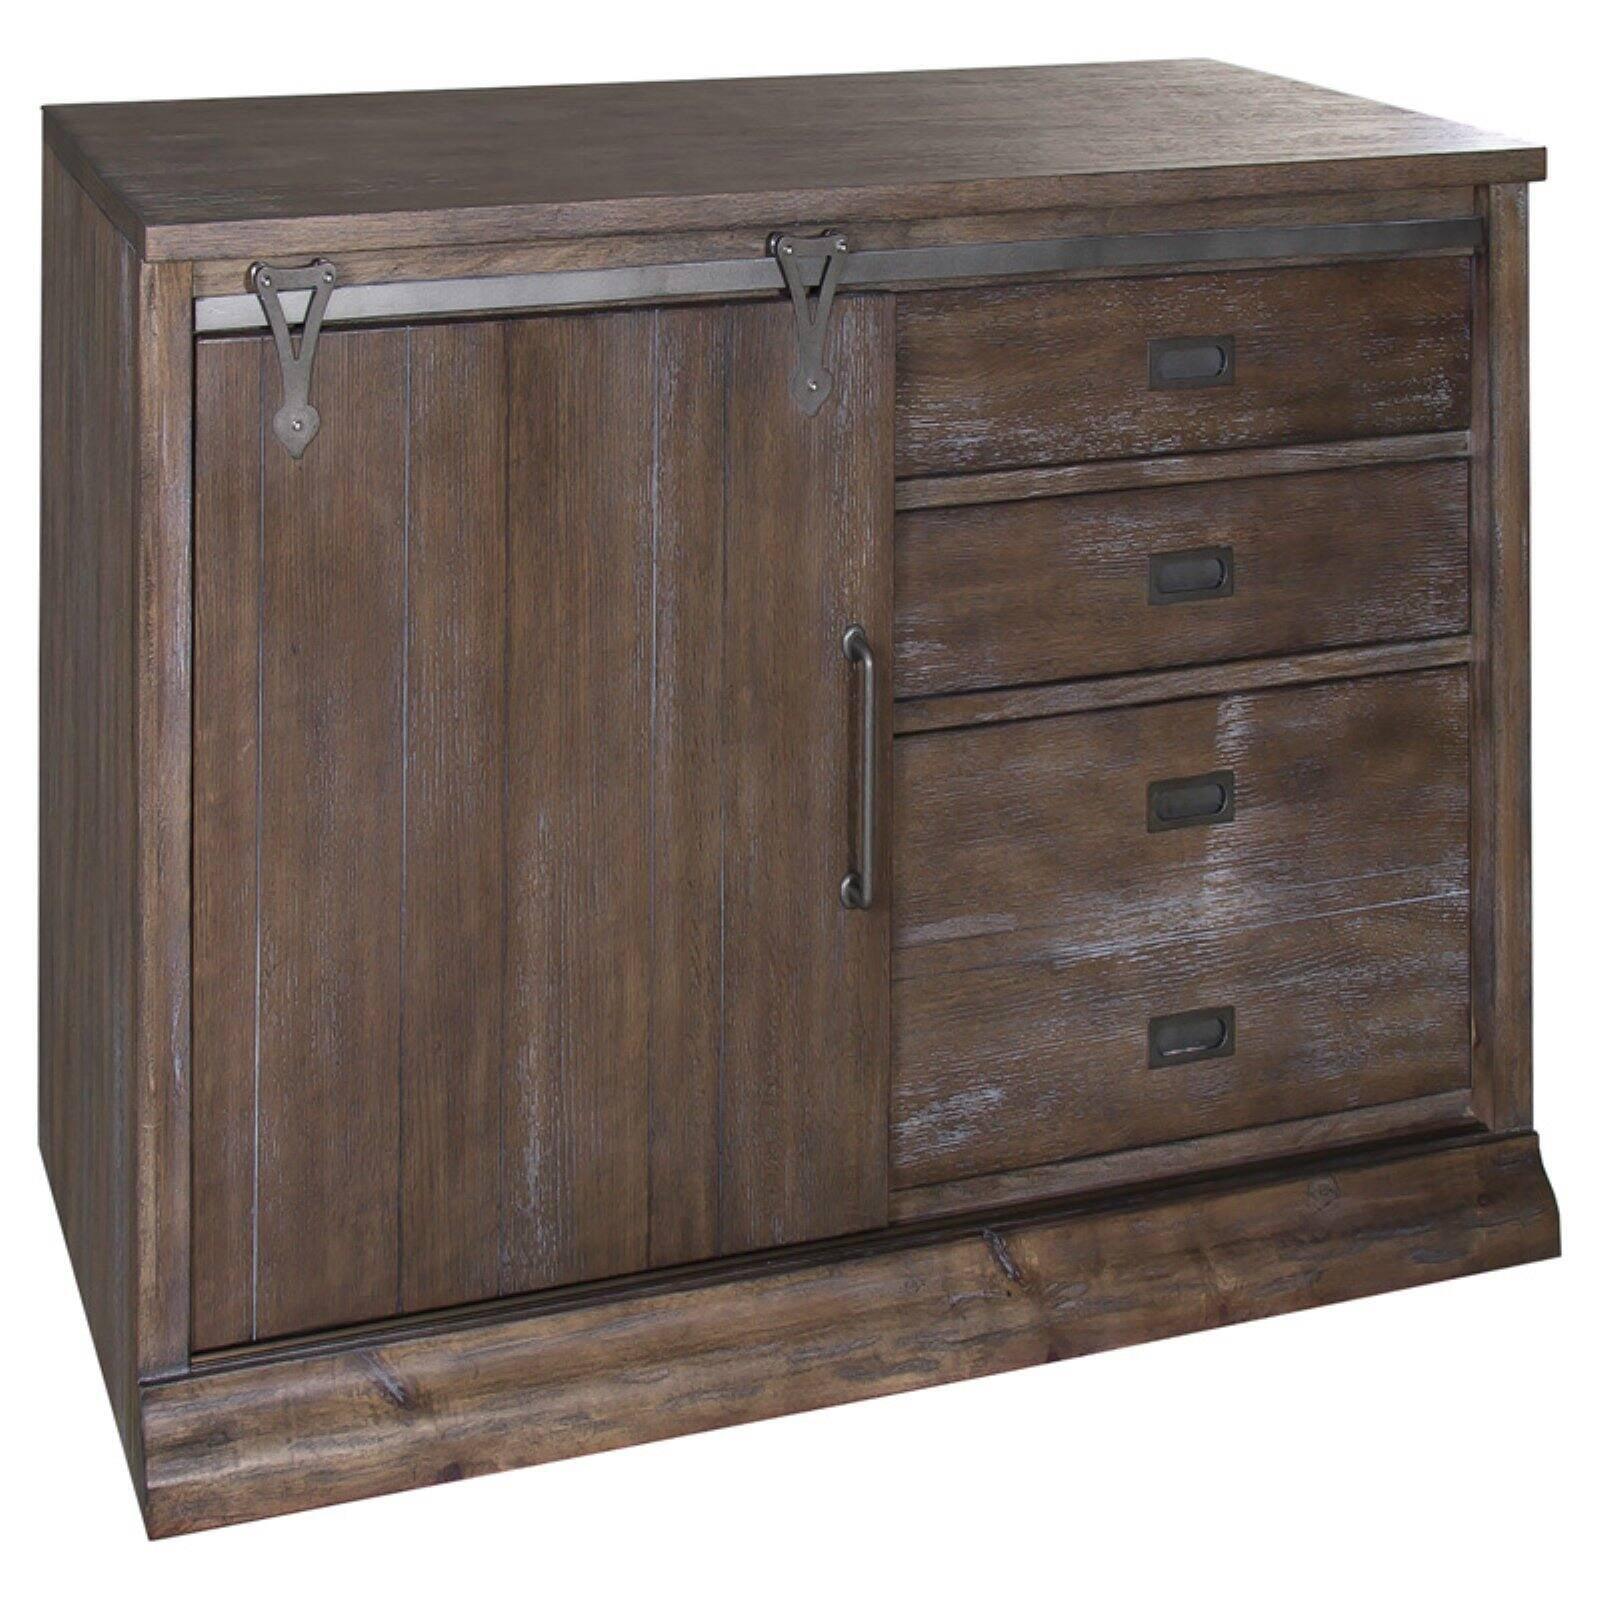 Saddle Brown Poplar and White Oak 54" Executive Desk with Hutch